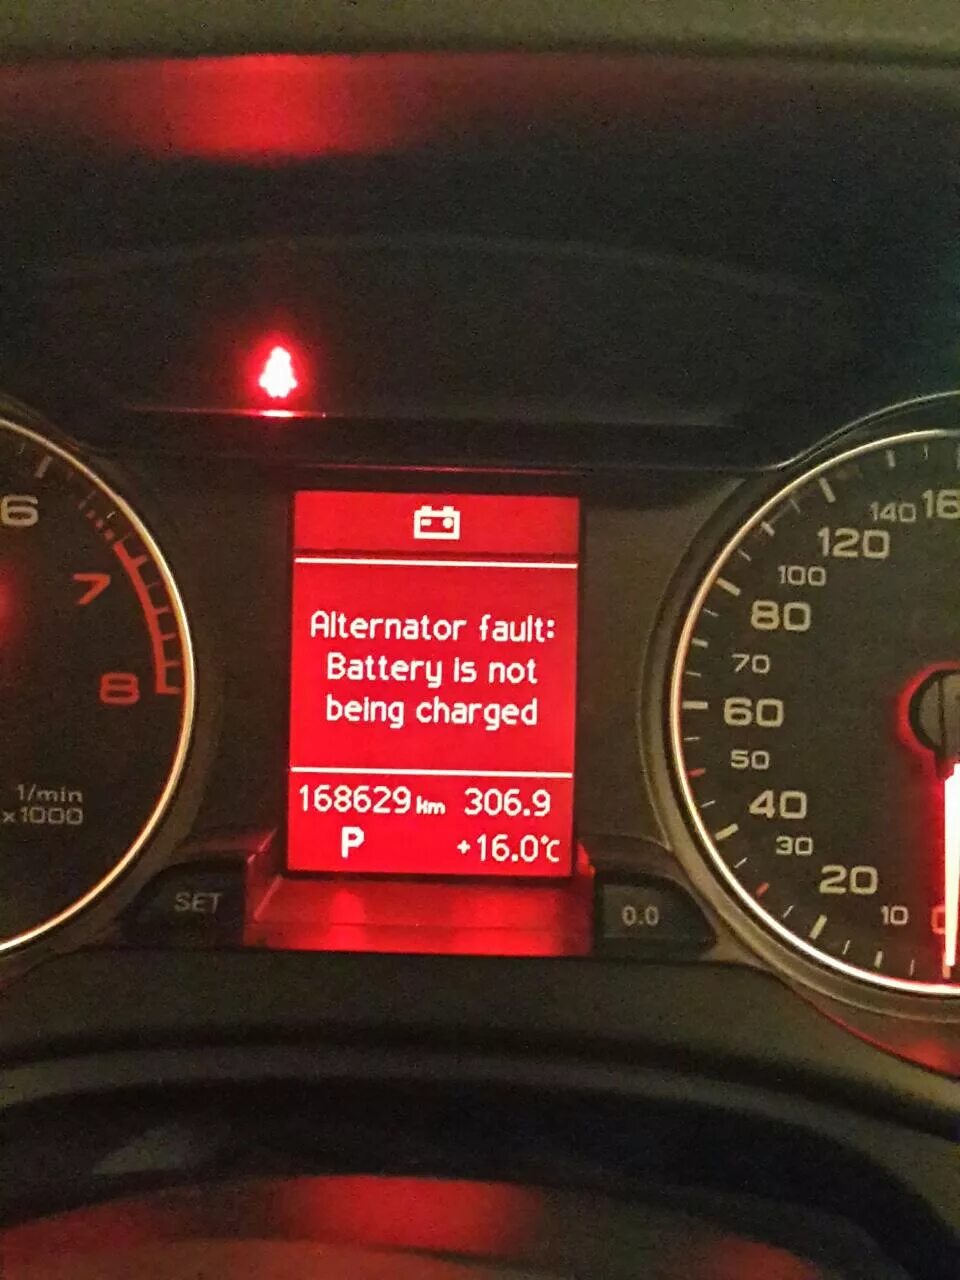 Battery fault. Alternator Fault Battery is not being charged Audi q5. Ошибка Ауди Генератор.